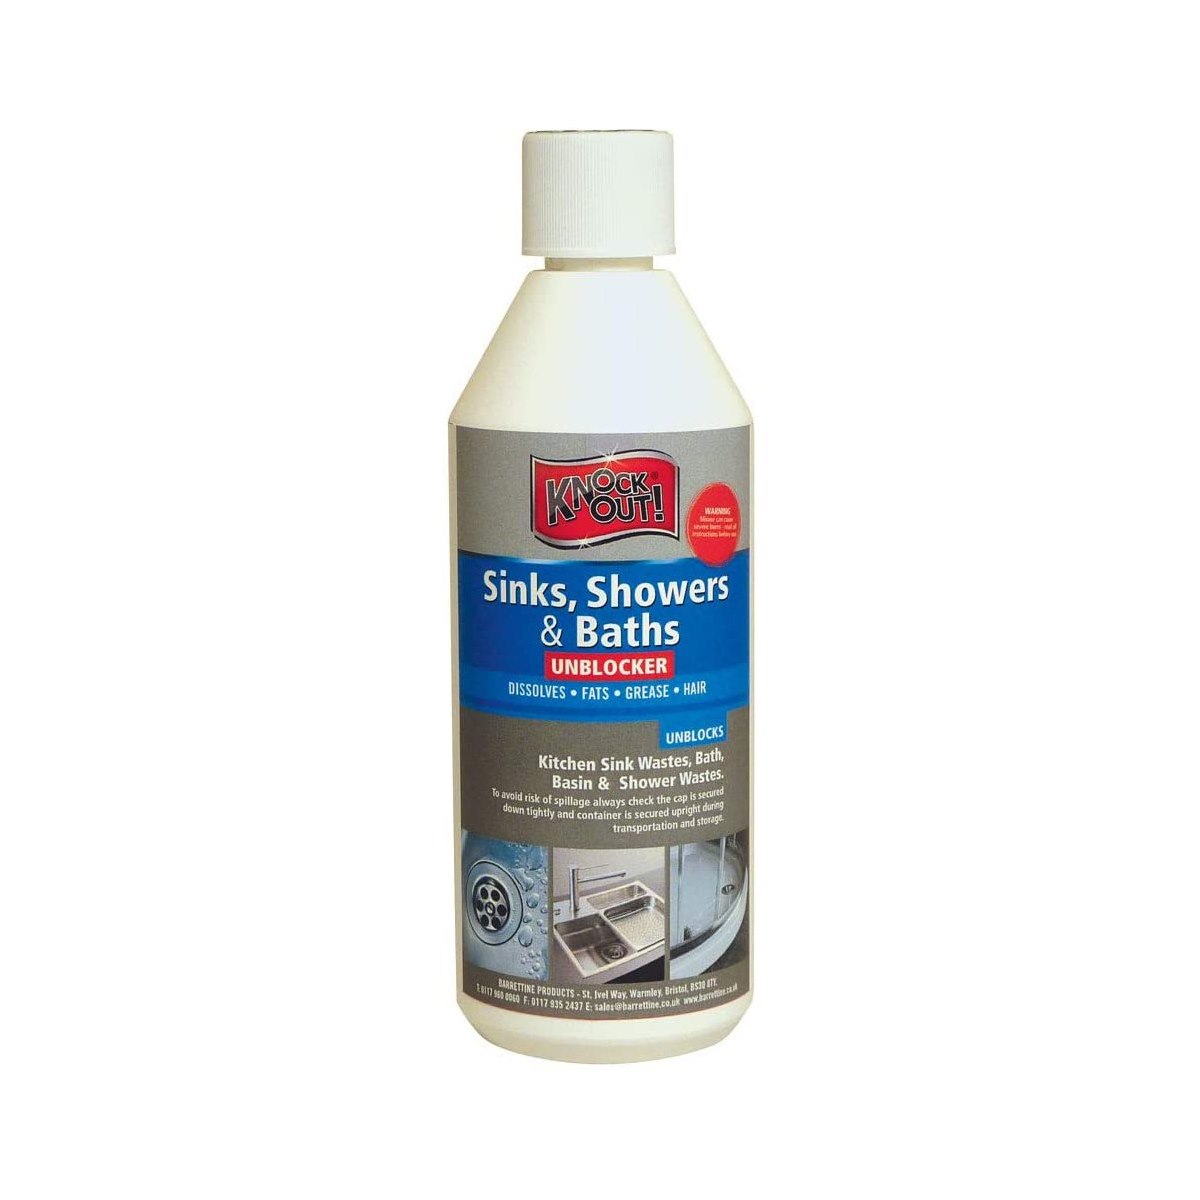 Knock Out Sinks, Showers and Baths Unblocker 500ml